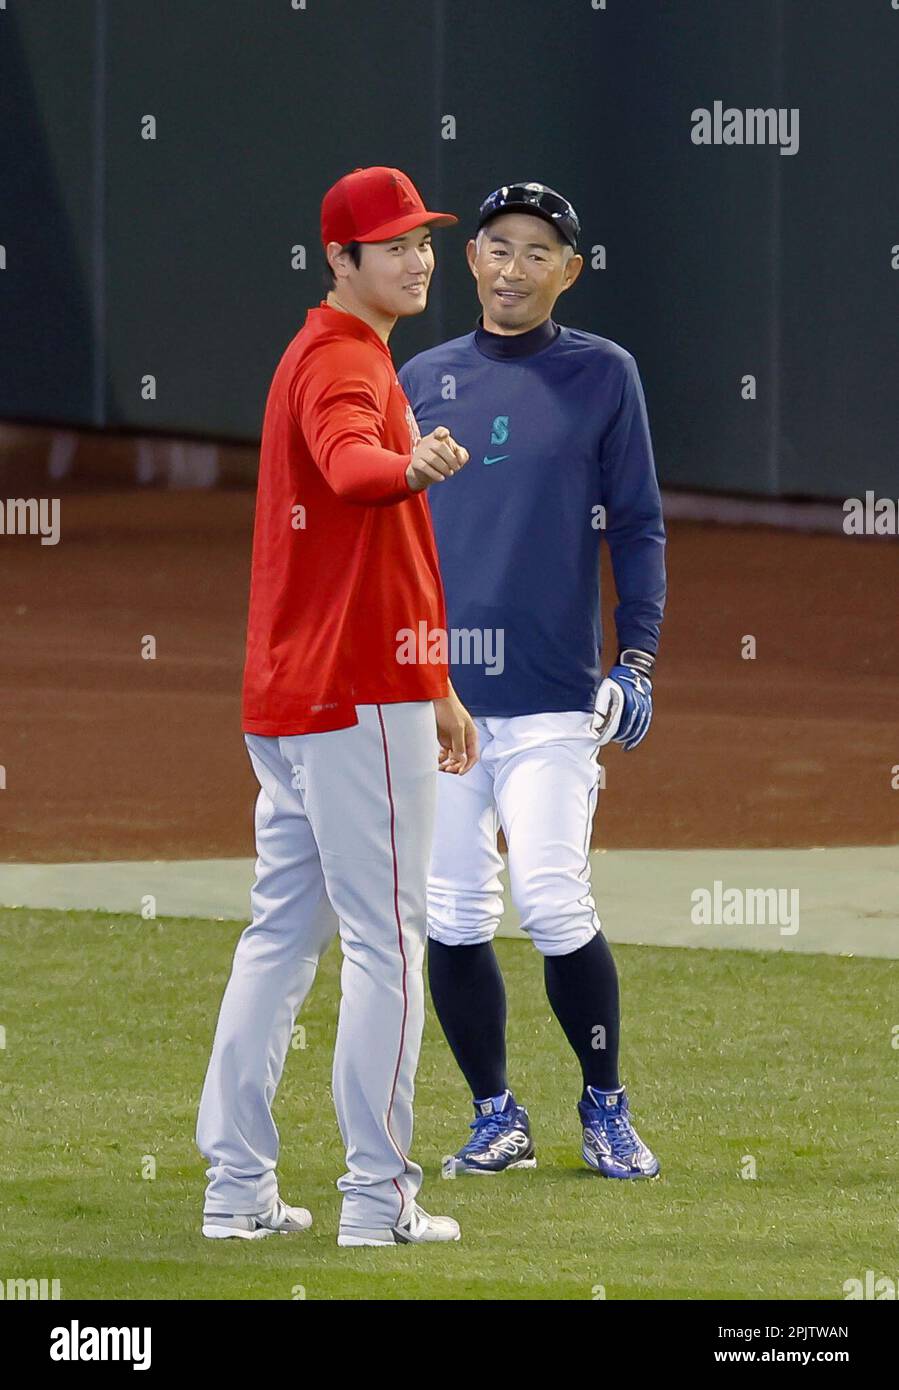 Los Angeles Angels two-way player Shohei Ohtani (L) and former Seattle  Mariners outfielder Ichiro Suzuki are pictured before a game between the  two teams on July 10, 2021, at T-Mobile Park in